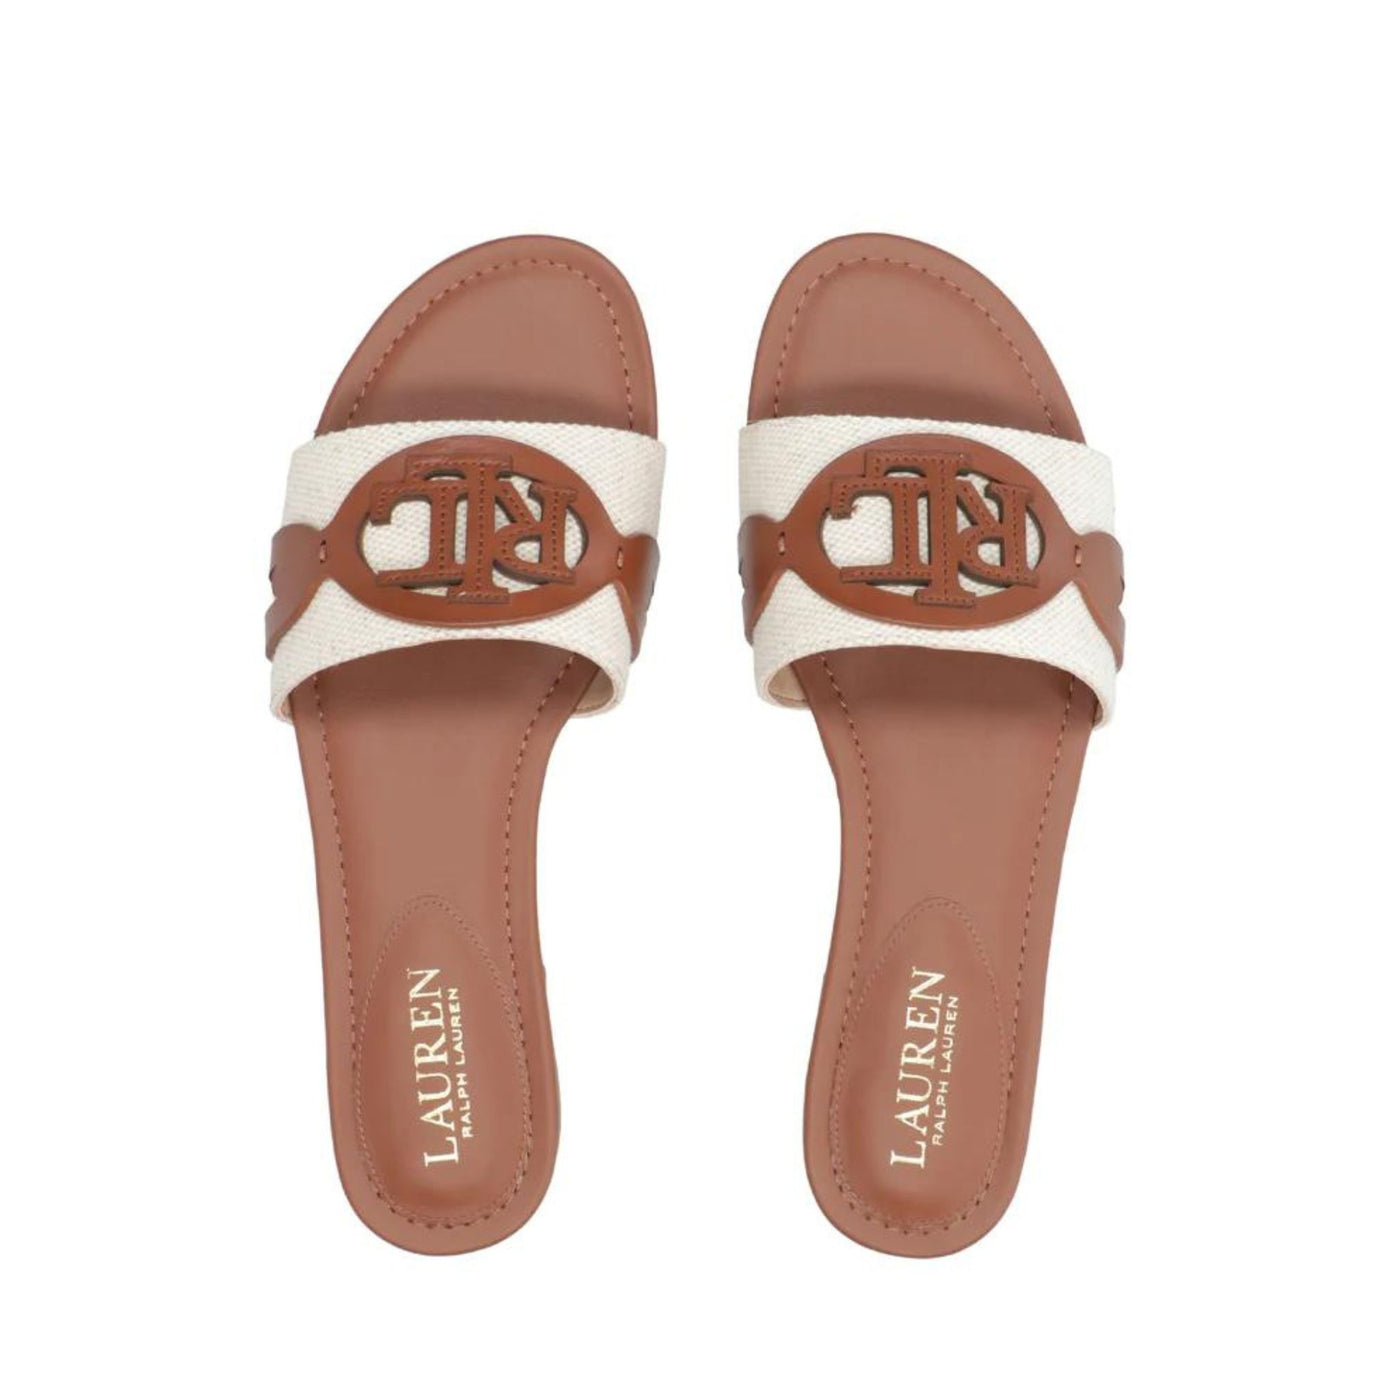 Women's sandals with leather logo